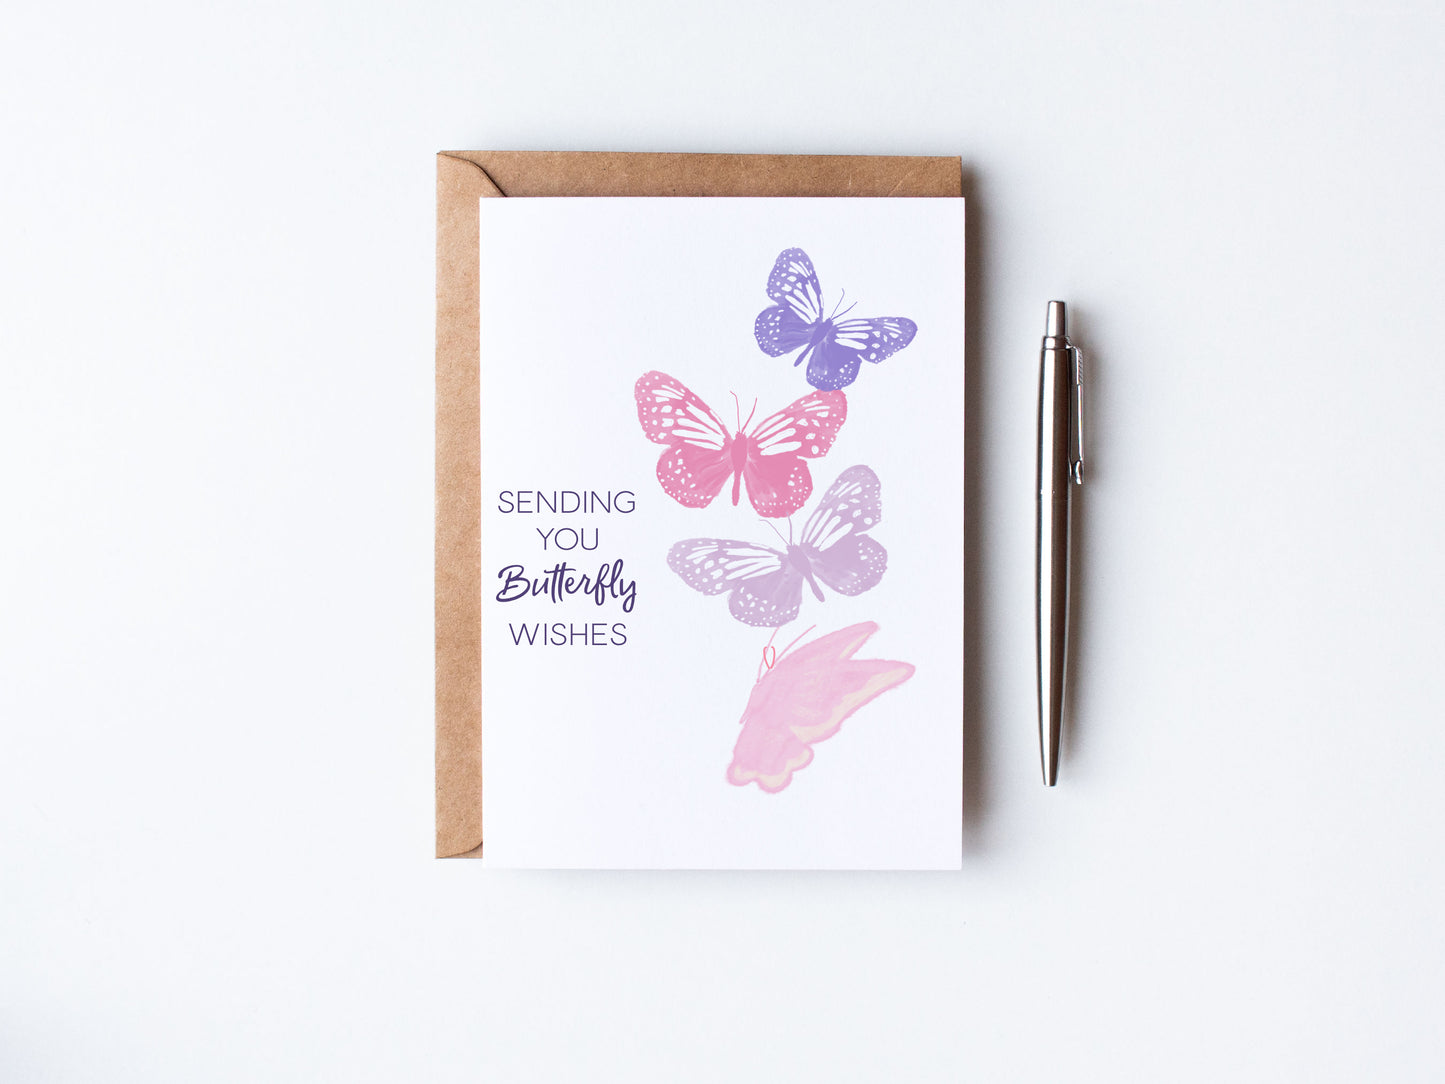 Pinks and Purple Butterflies over top a polka daot background - Sending you Butterfly Wishes